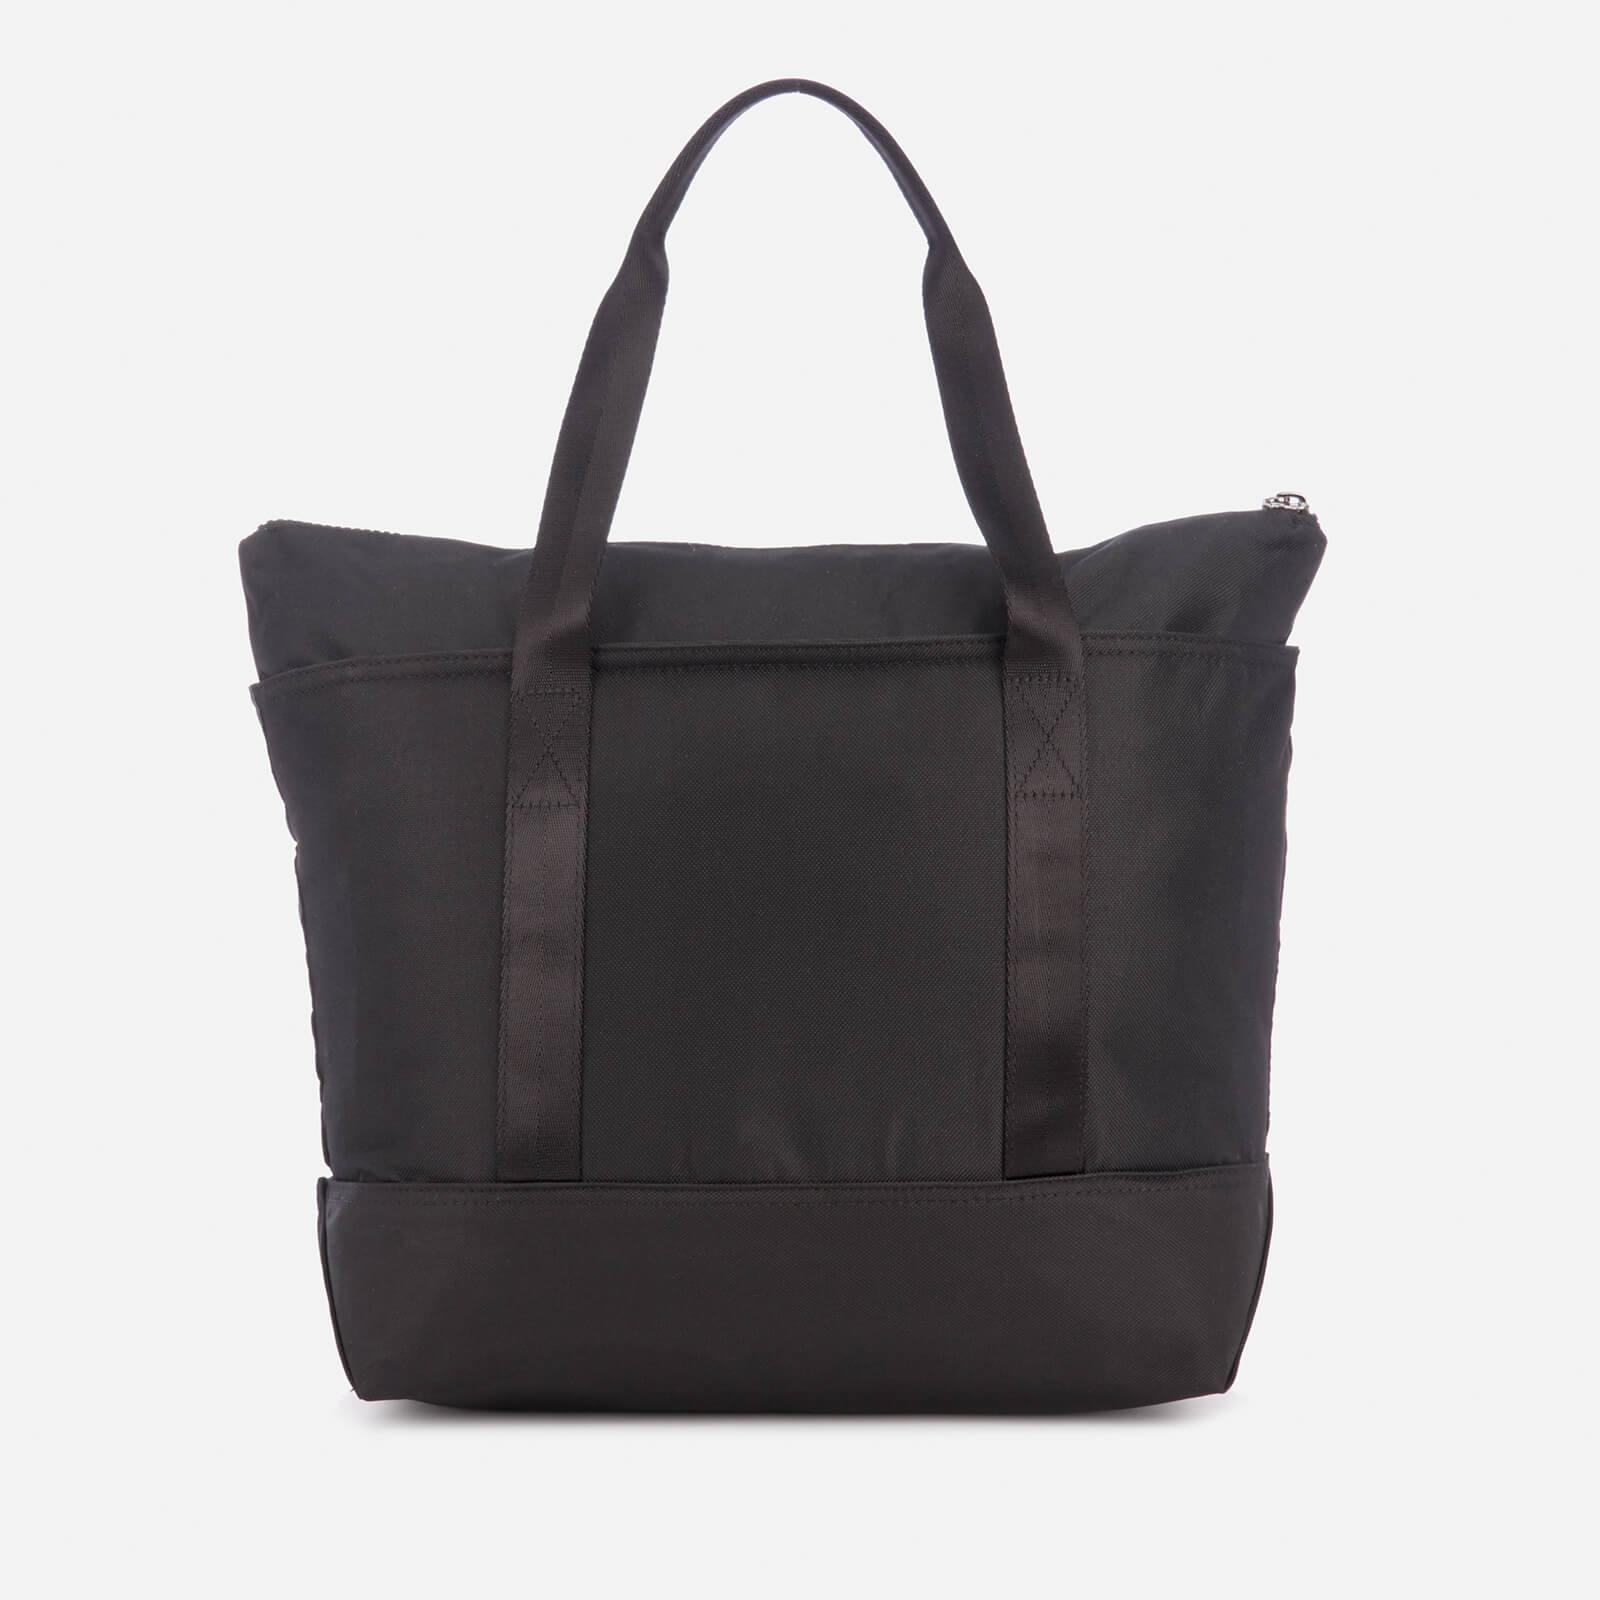 Lyst - Calvin Klein Sport Essential Carry All Tote Bag in Black